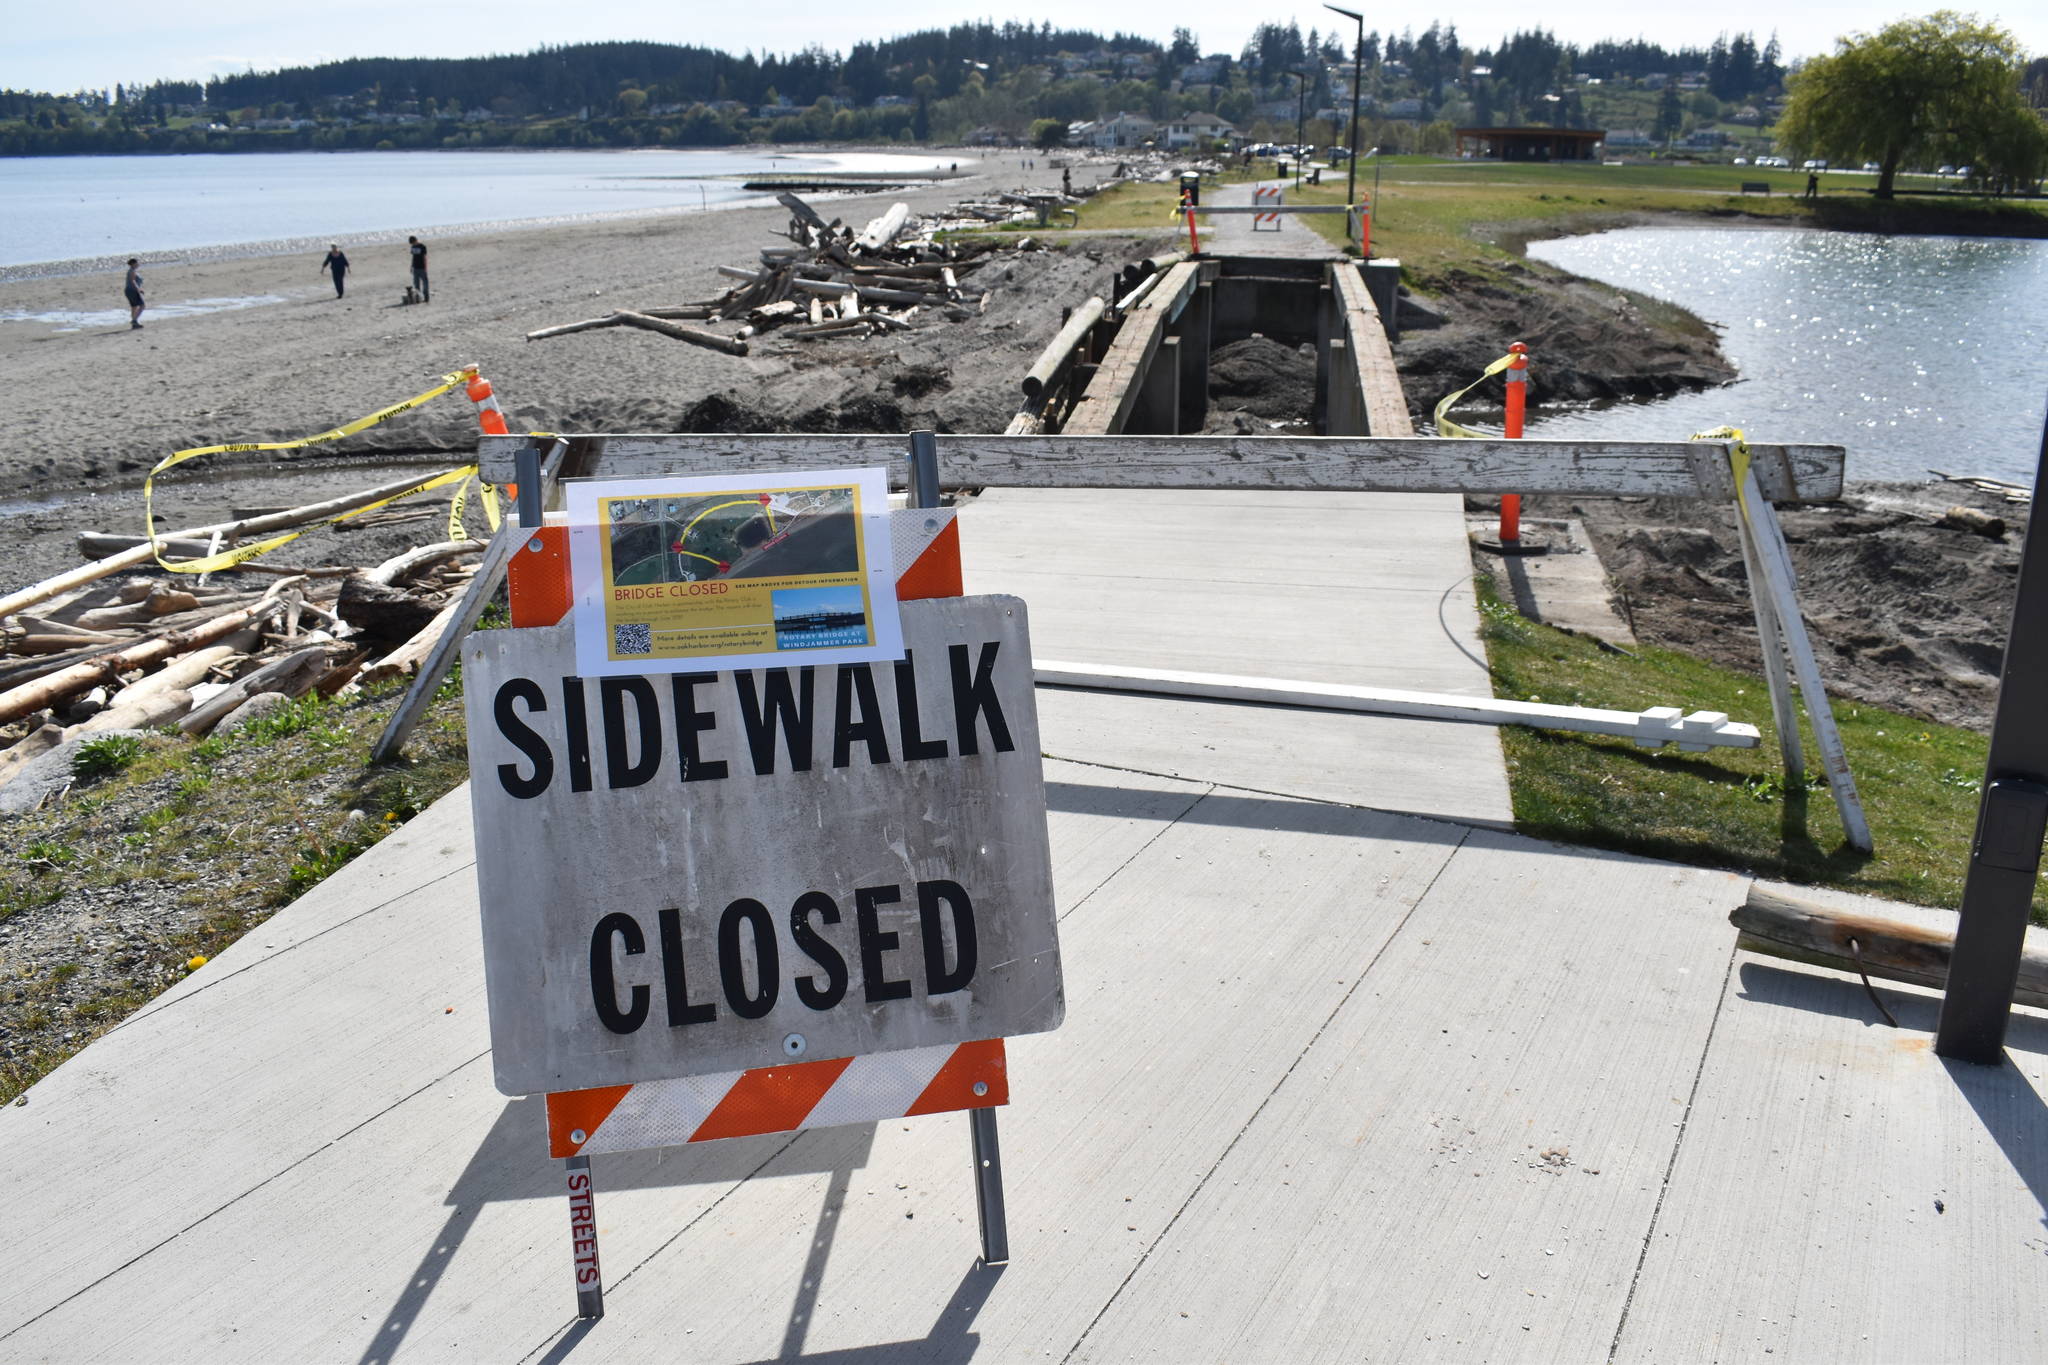 The bridge across the lagoon at Windjammer Park is undergoing a joint restoration project between the city and the two Rotary clubs in Oak Harbor. The city said it will be closed until June. Photo by Emily Gilbert/Whidbey News-Times